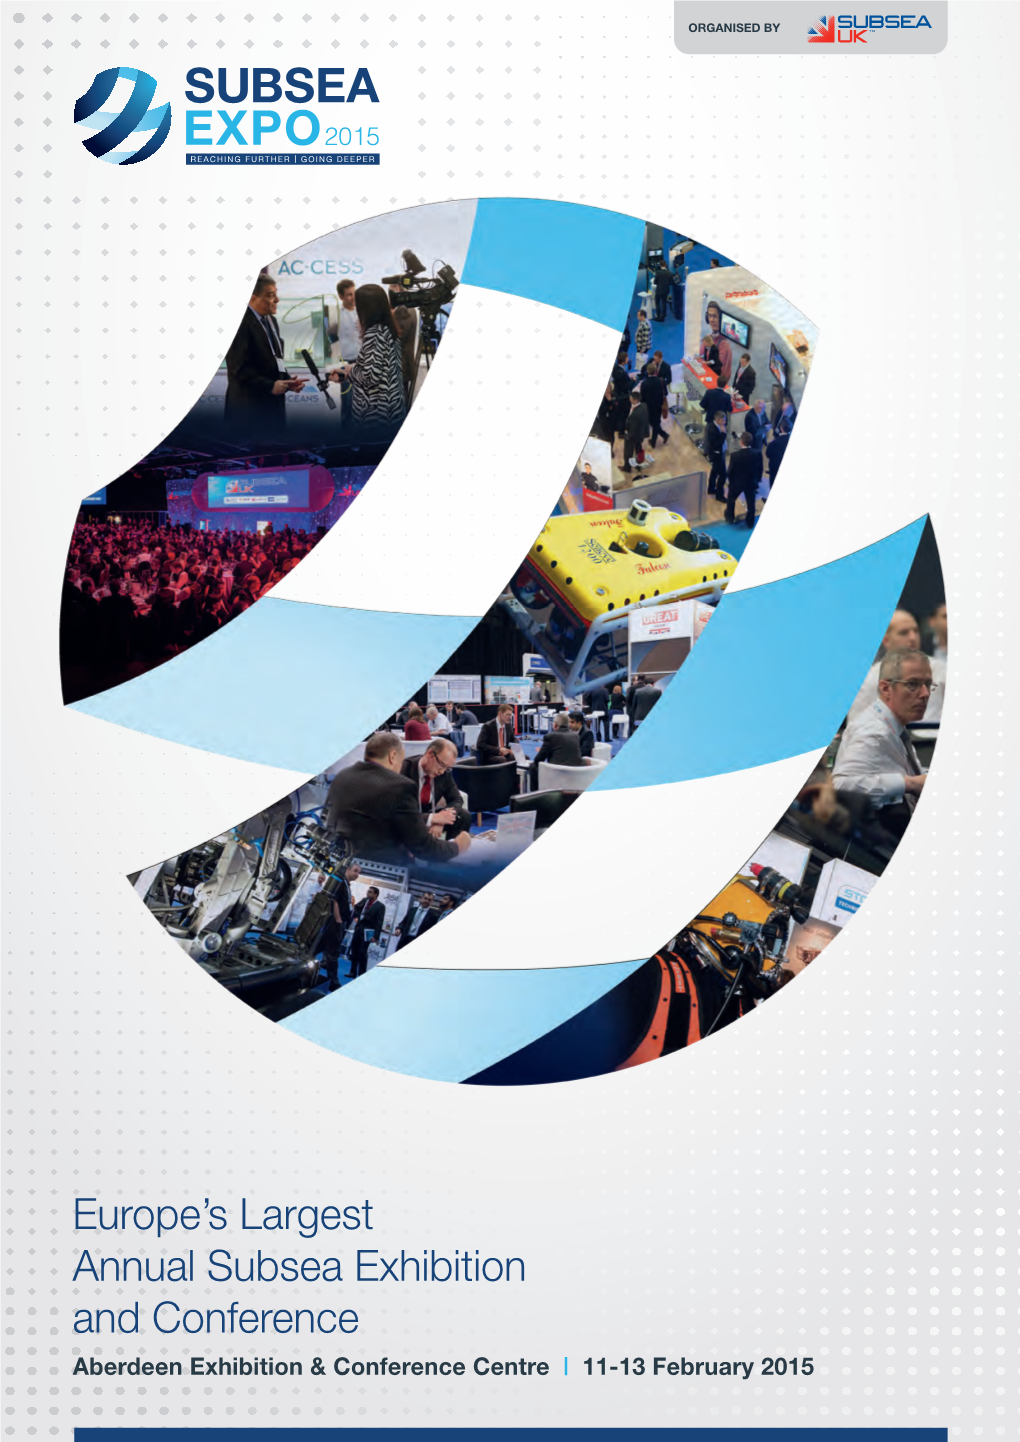 Europe's Largest Annual Subsea Exhibition and Conference